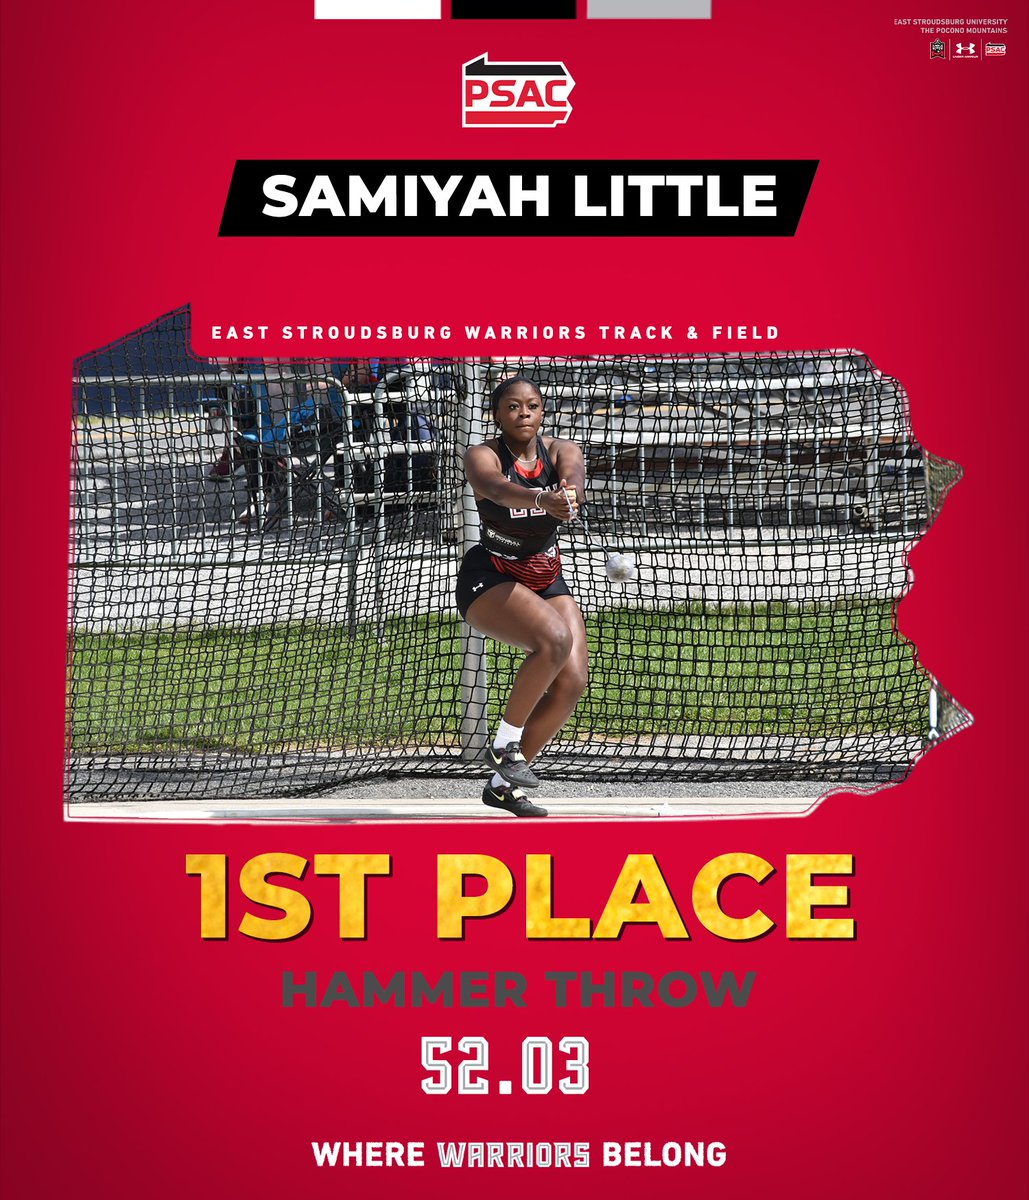 PSAC CHAMPION🏆 Congratulations to Samiyah Little on capturing the hammer throw title with a mark of 52.03m (170-8)! The junior became the first Warrior in program history to win the event at the PSAC Outdoor Championships! #WhereWarriorsBelong